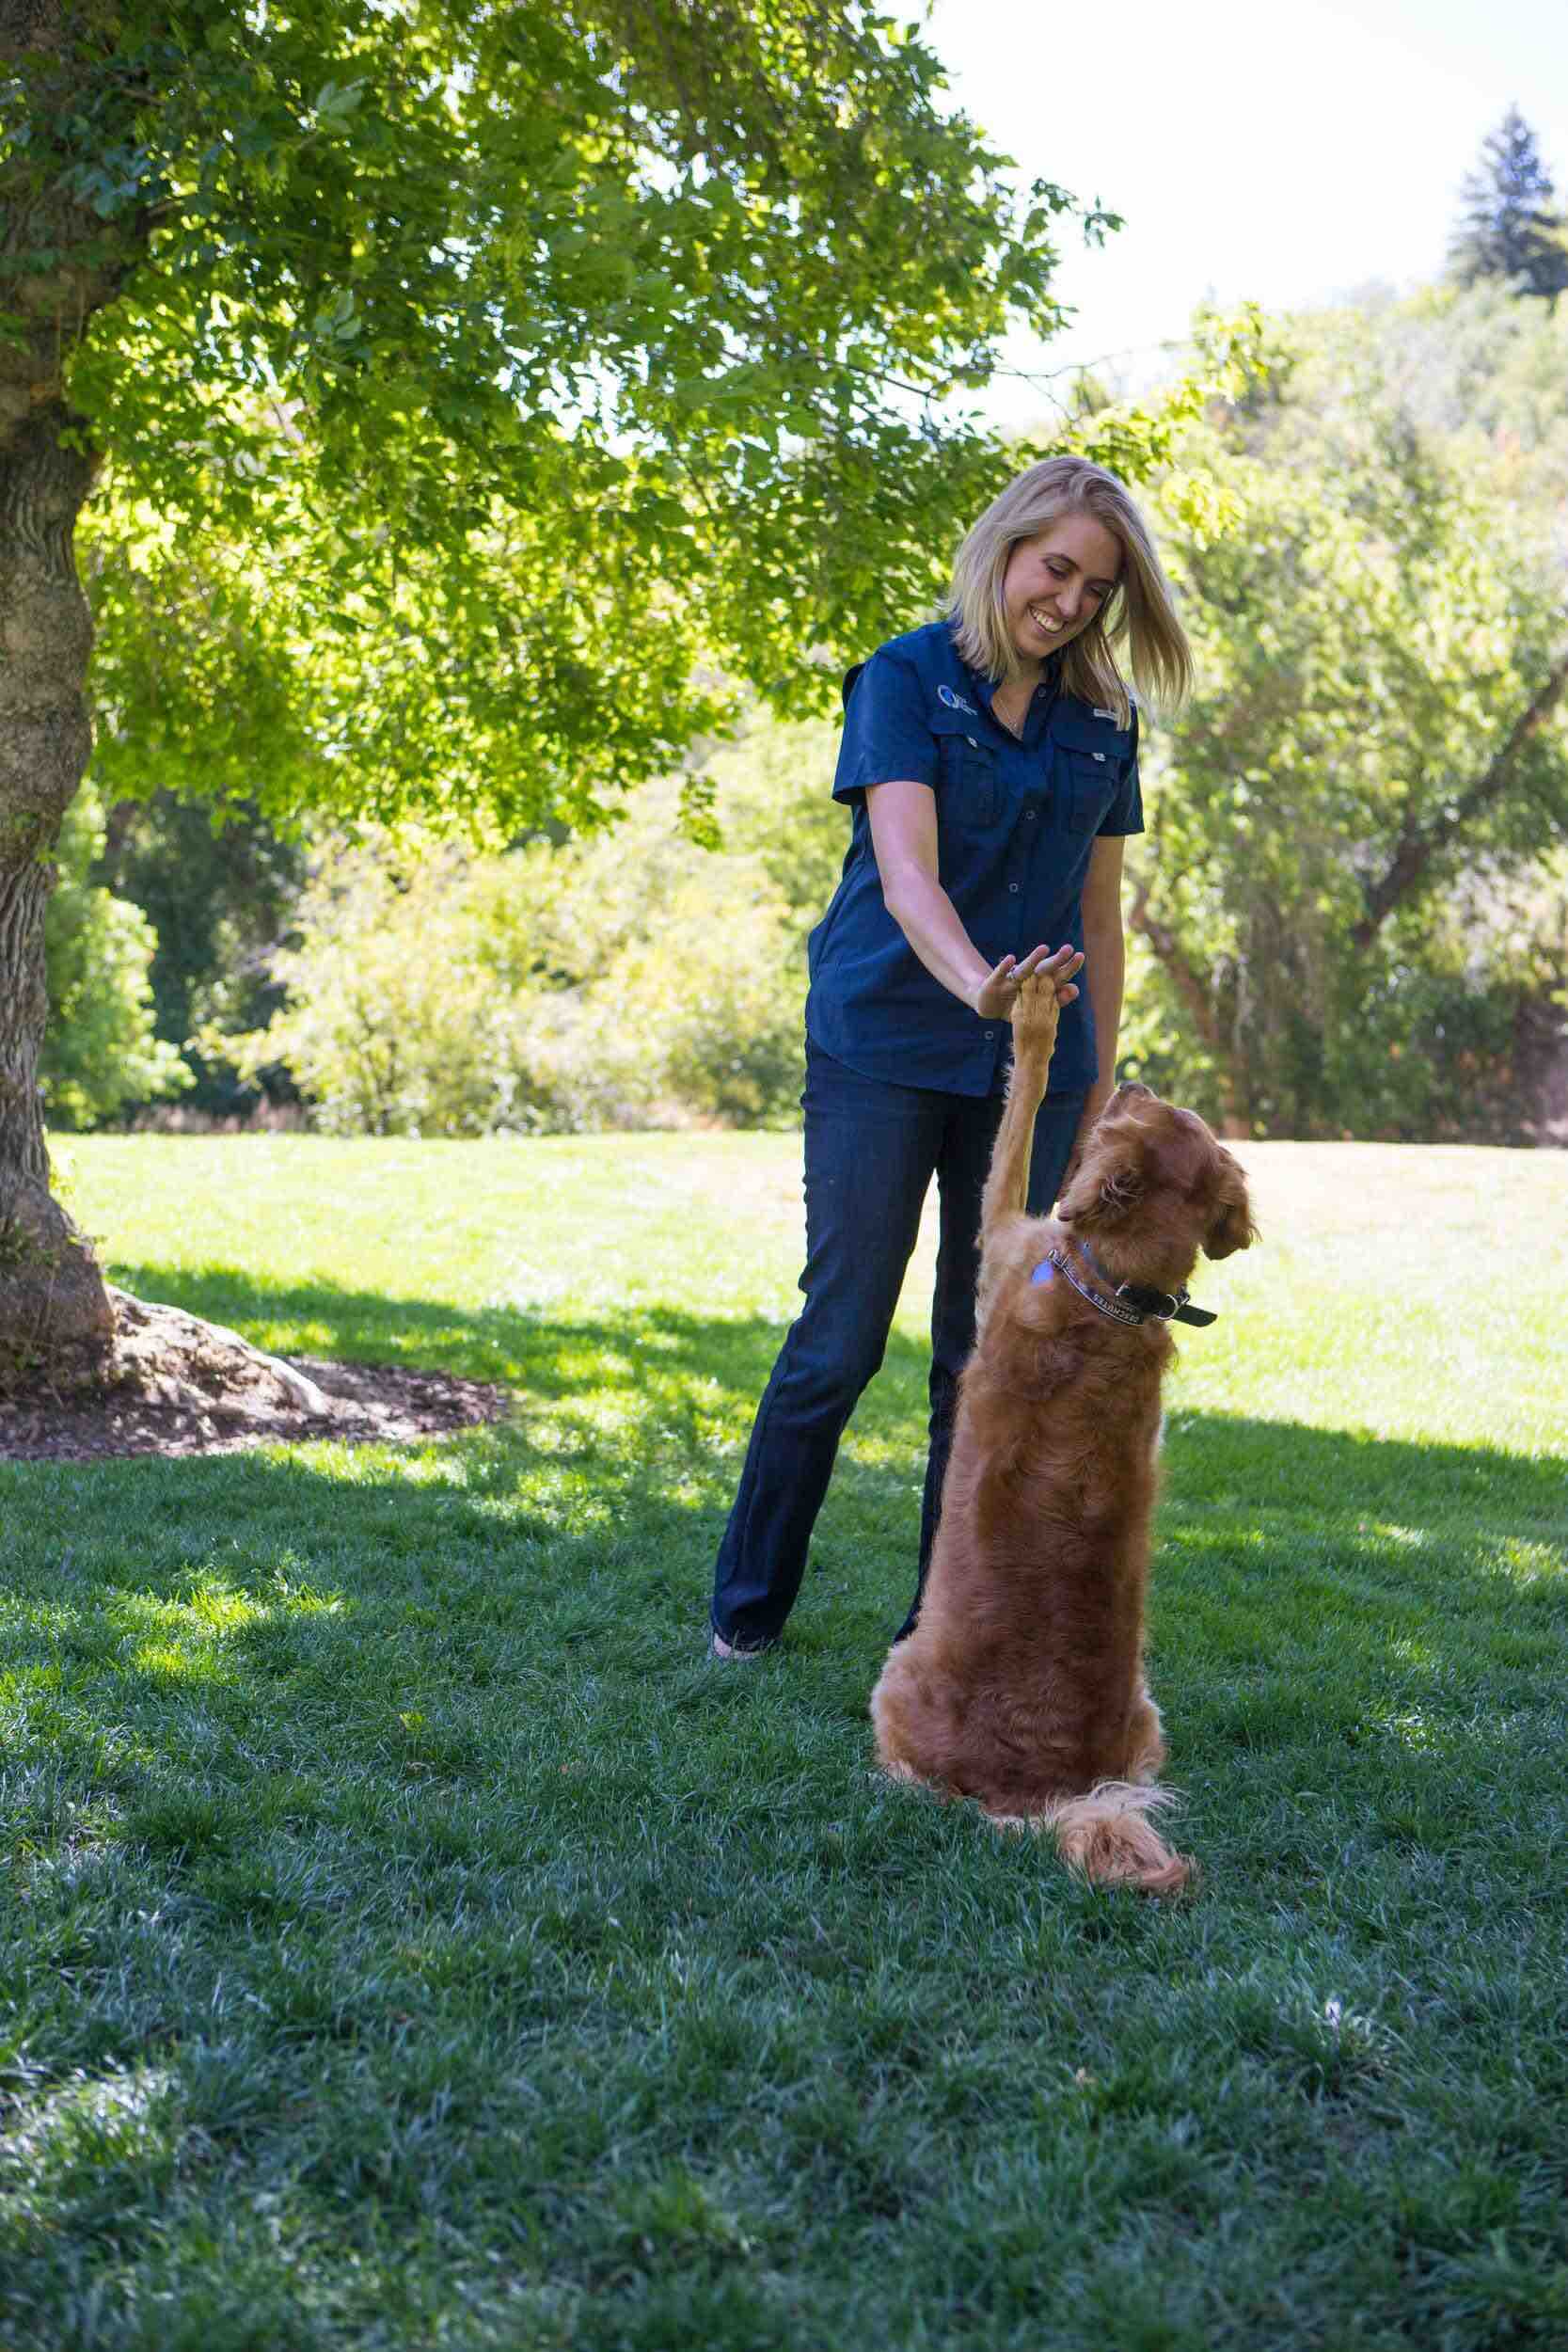 Dog Training Elite uses classical conditioning as one of their dog training techniques in Kansas City.